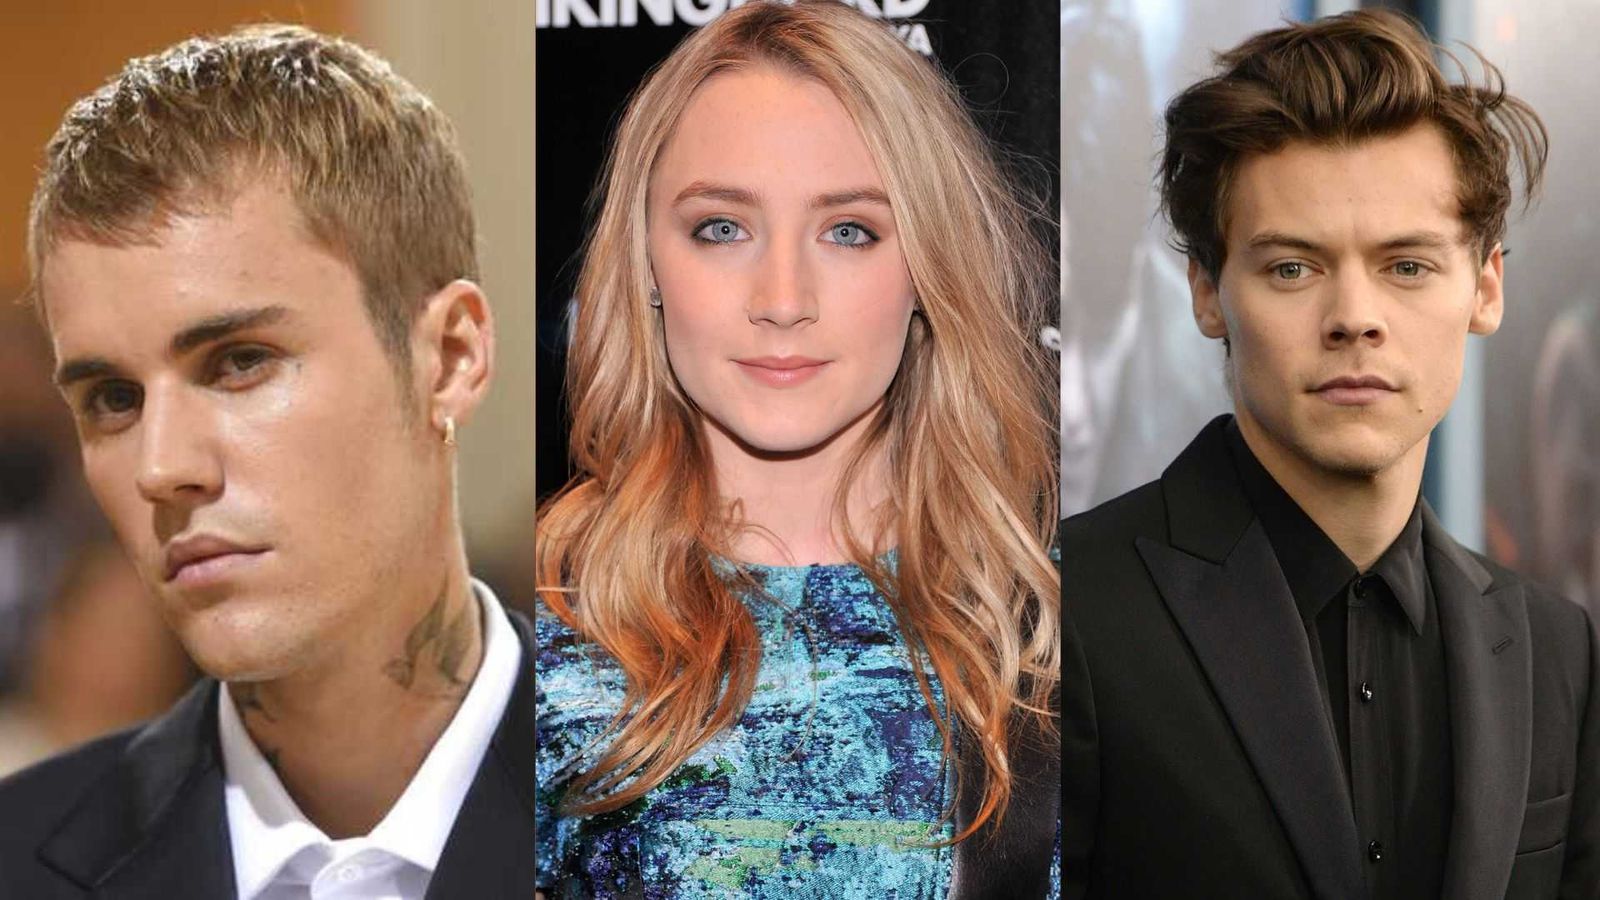 Justin Bieber, Saoirse Ronan, and Harry Styles (Source: Instagram)